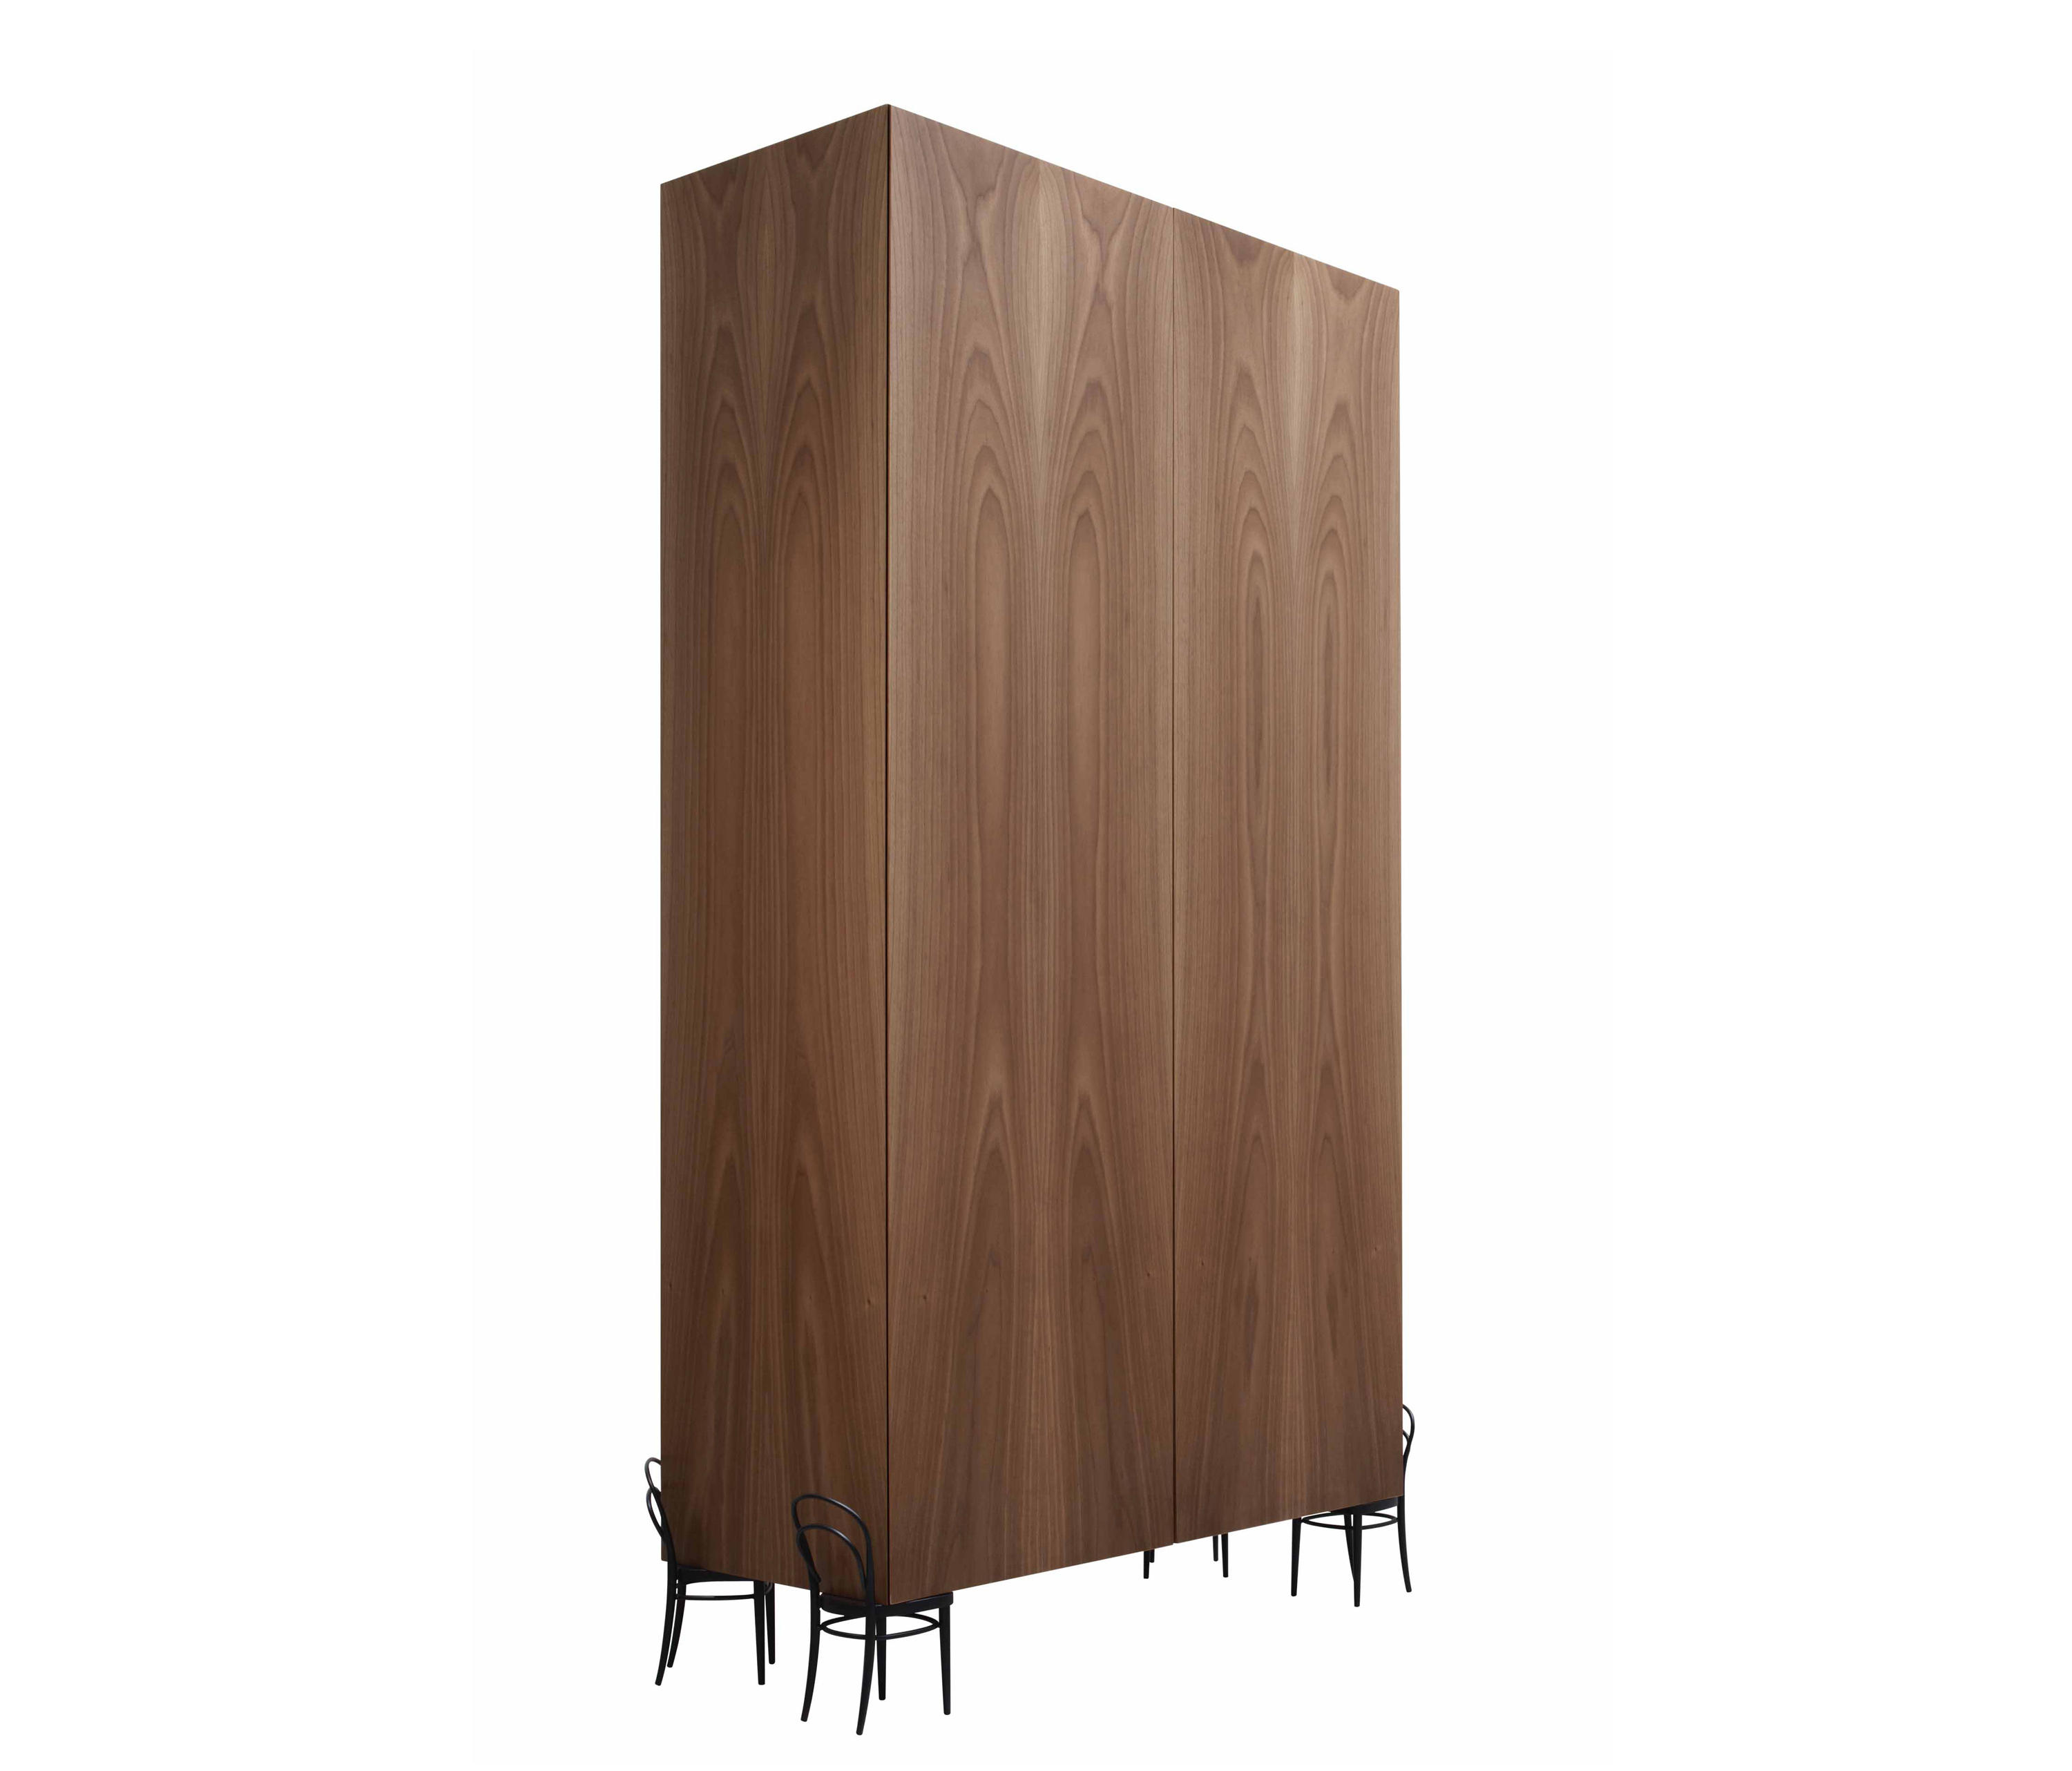 56 Cabinet Cabinets From Adele C Architonic